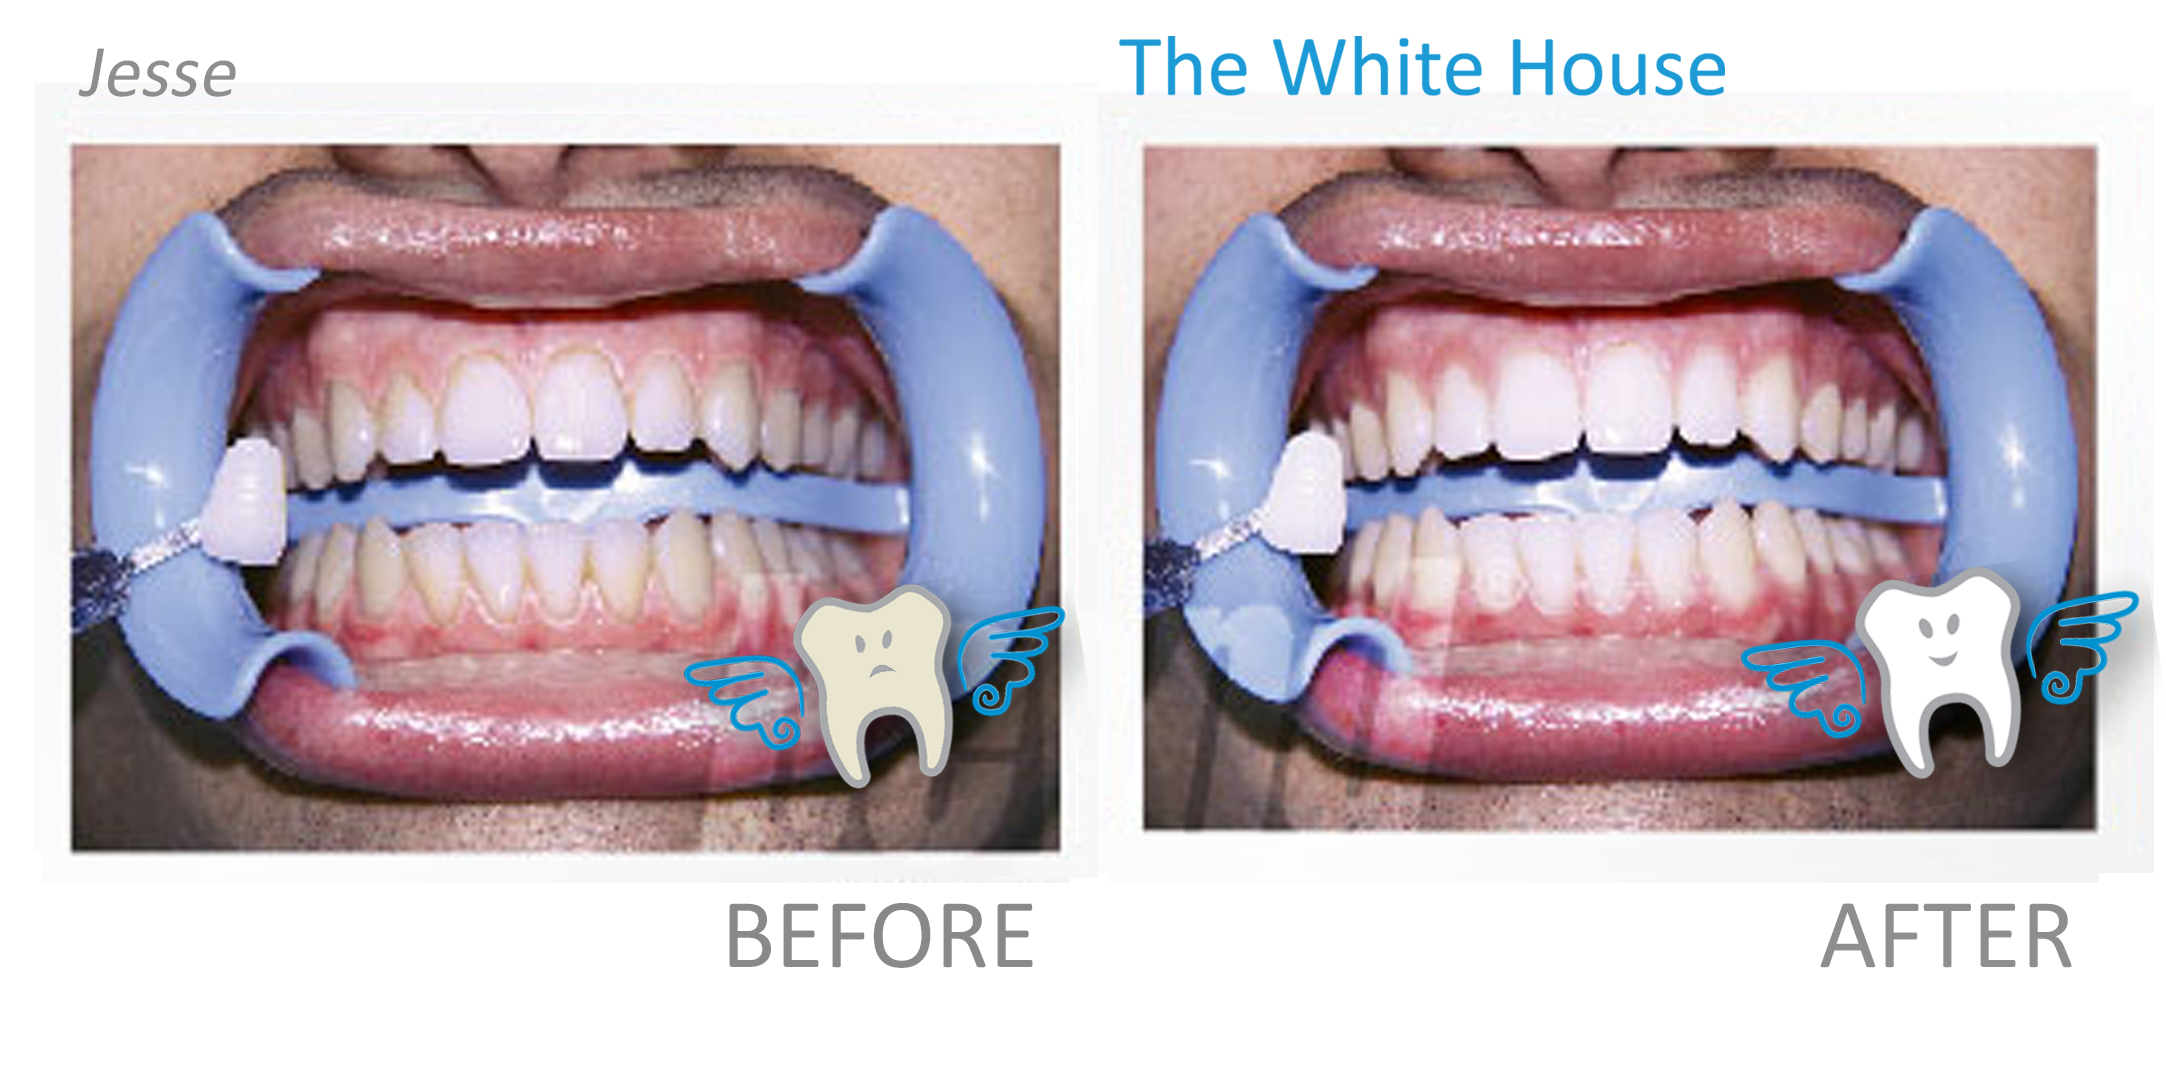 Teeth Whitening Before and Afte - Jesse